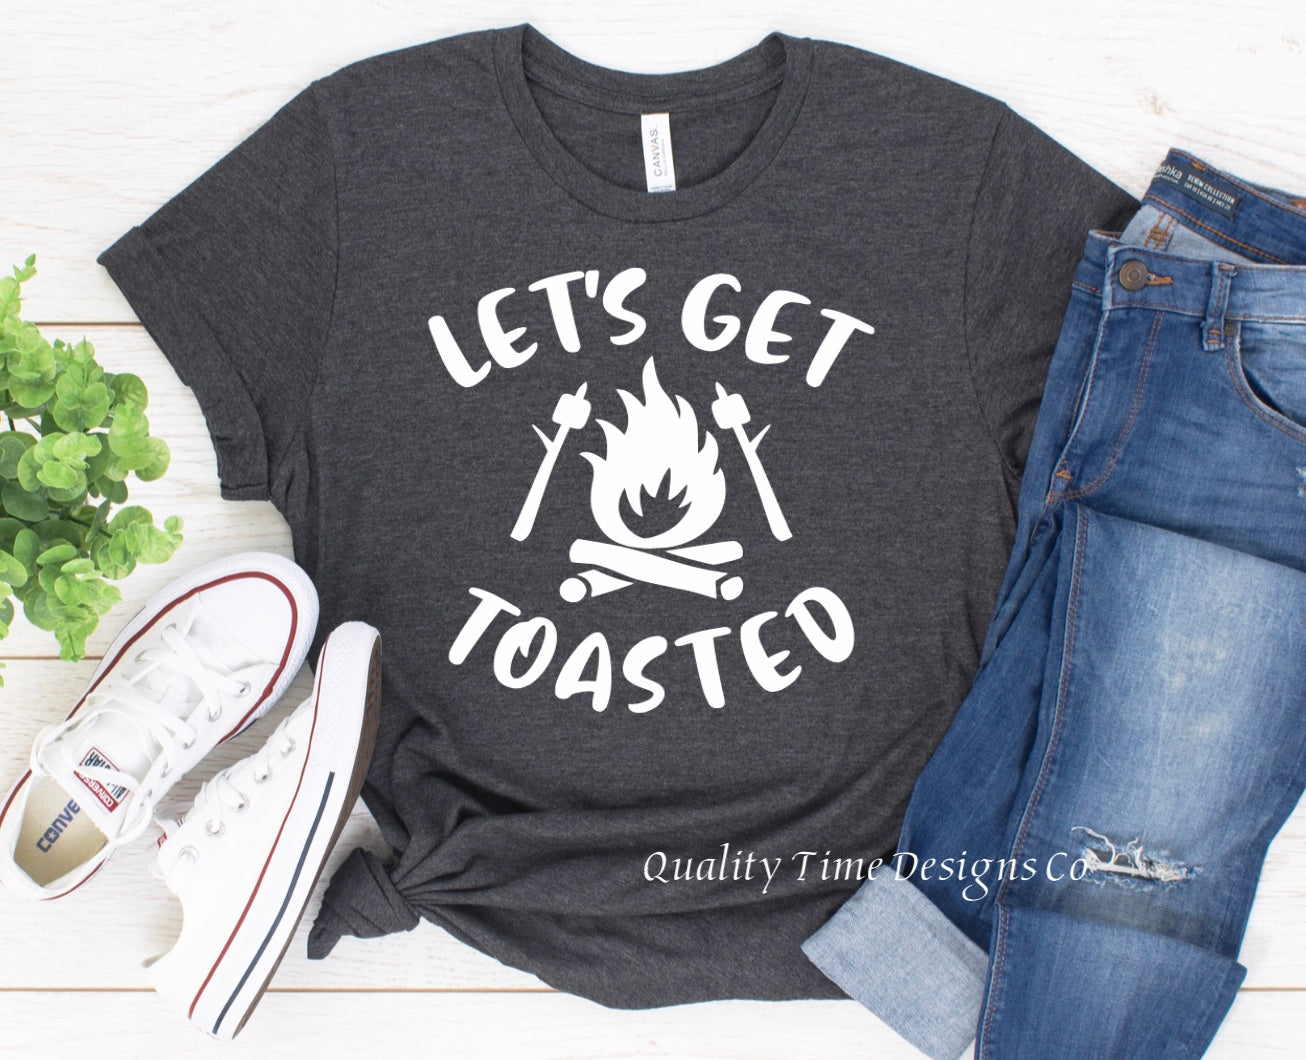 Let’s get Toasted- Camping t-shirt – Quality Time Designs Co